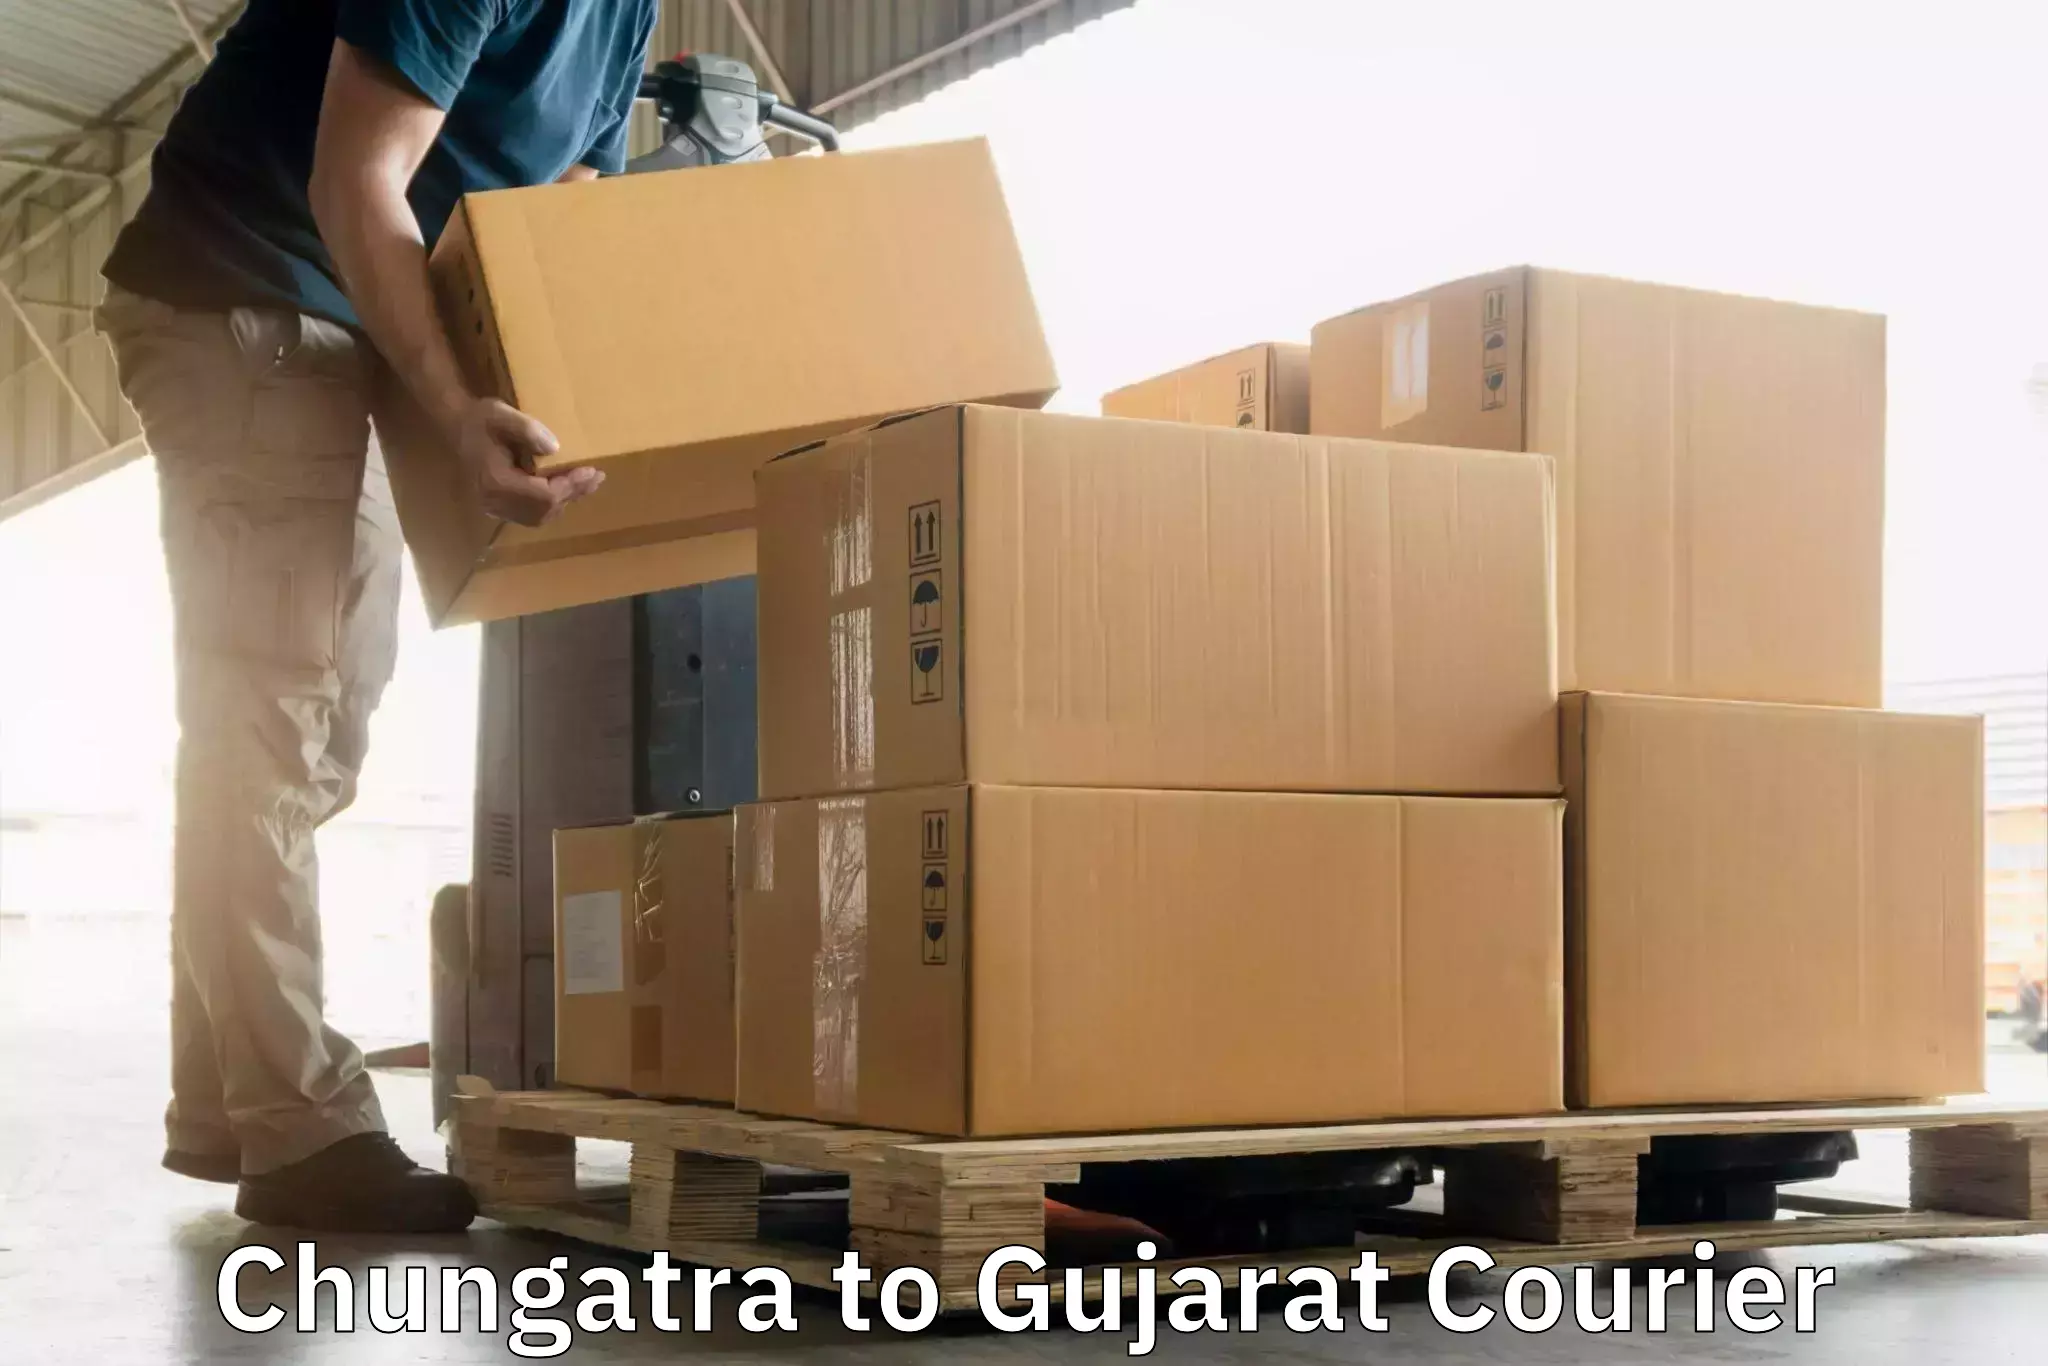 Parcel delivery automation Chungatra to Patan Gujarat